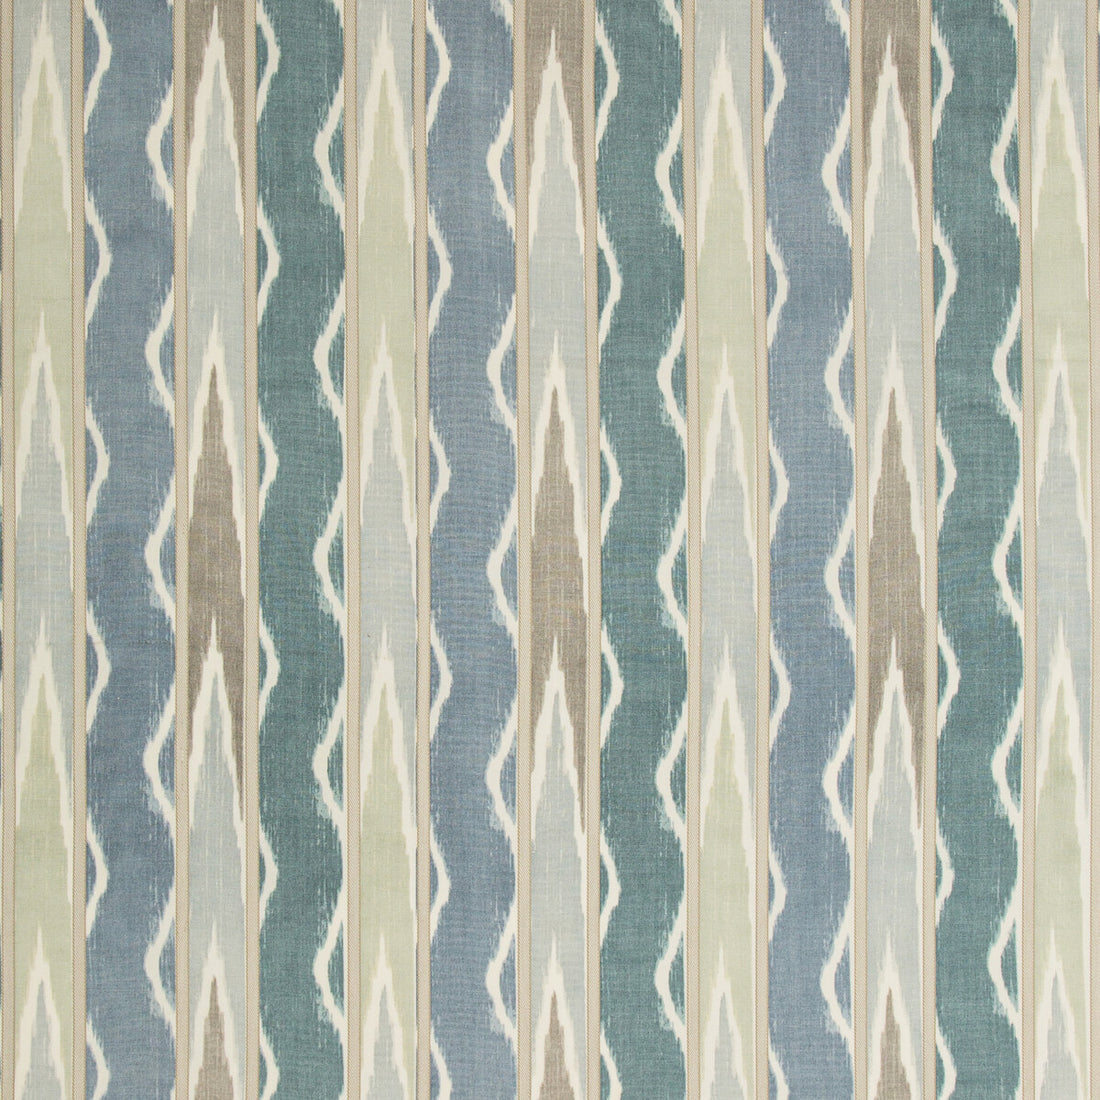 Ubud fabric in seaglass color - pattern UBUD.15.0 - by Kravet Couture in the Modern Colors-Sojourn Collection collection